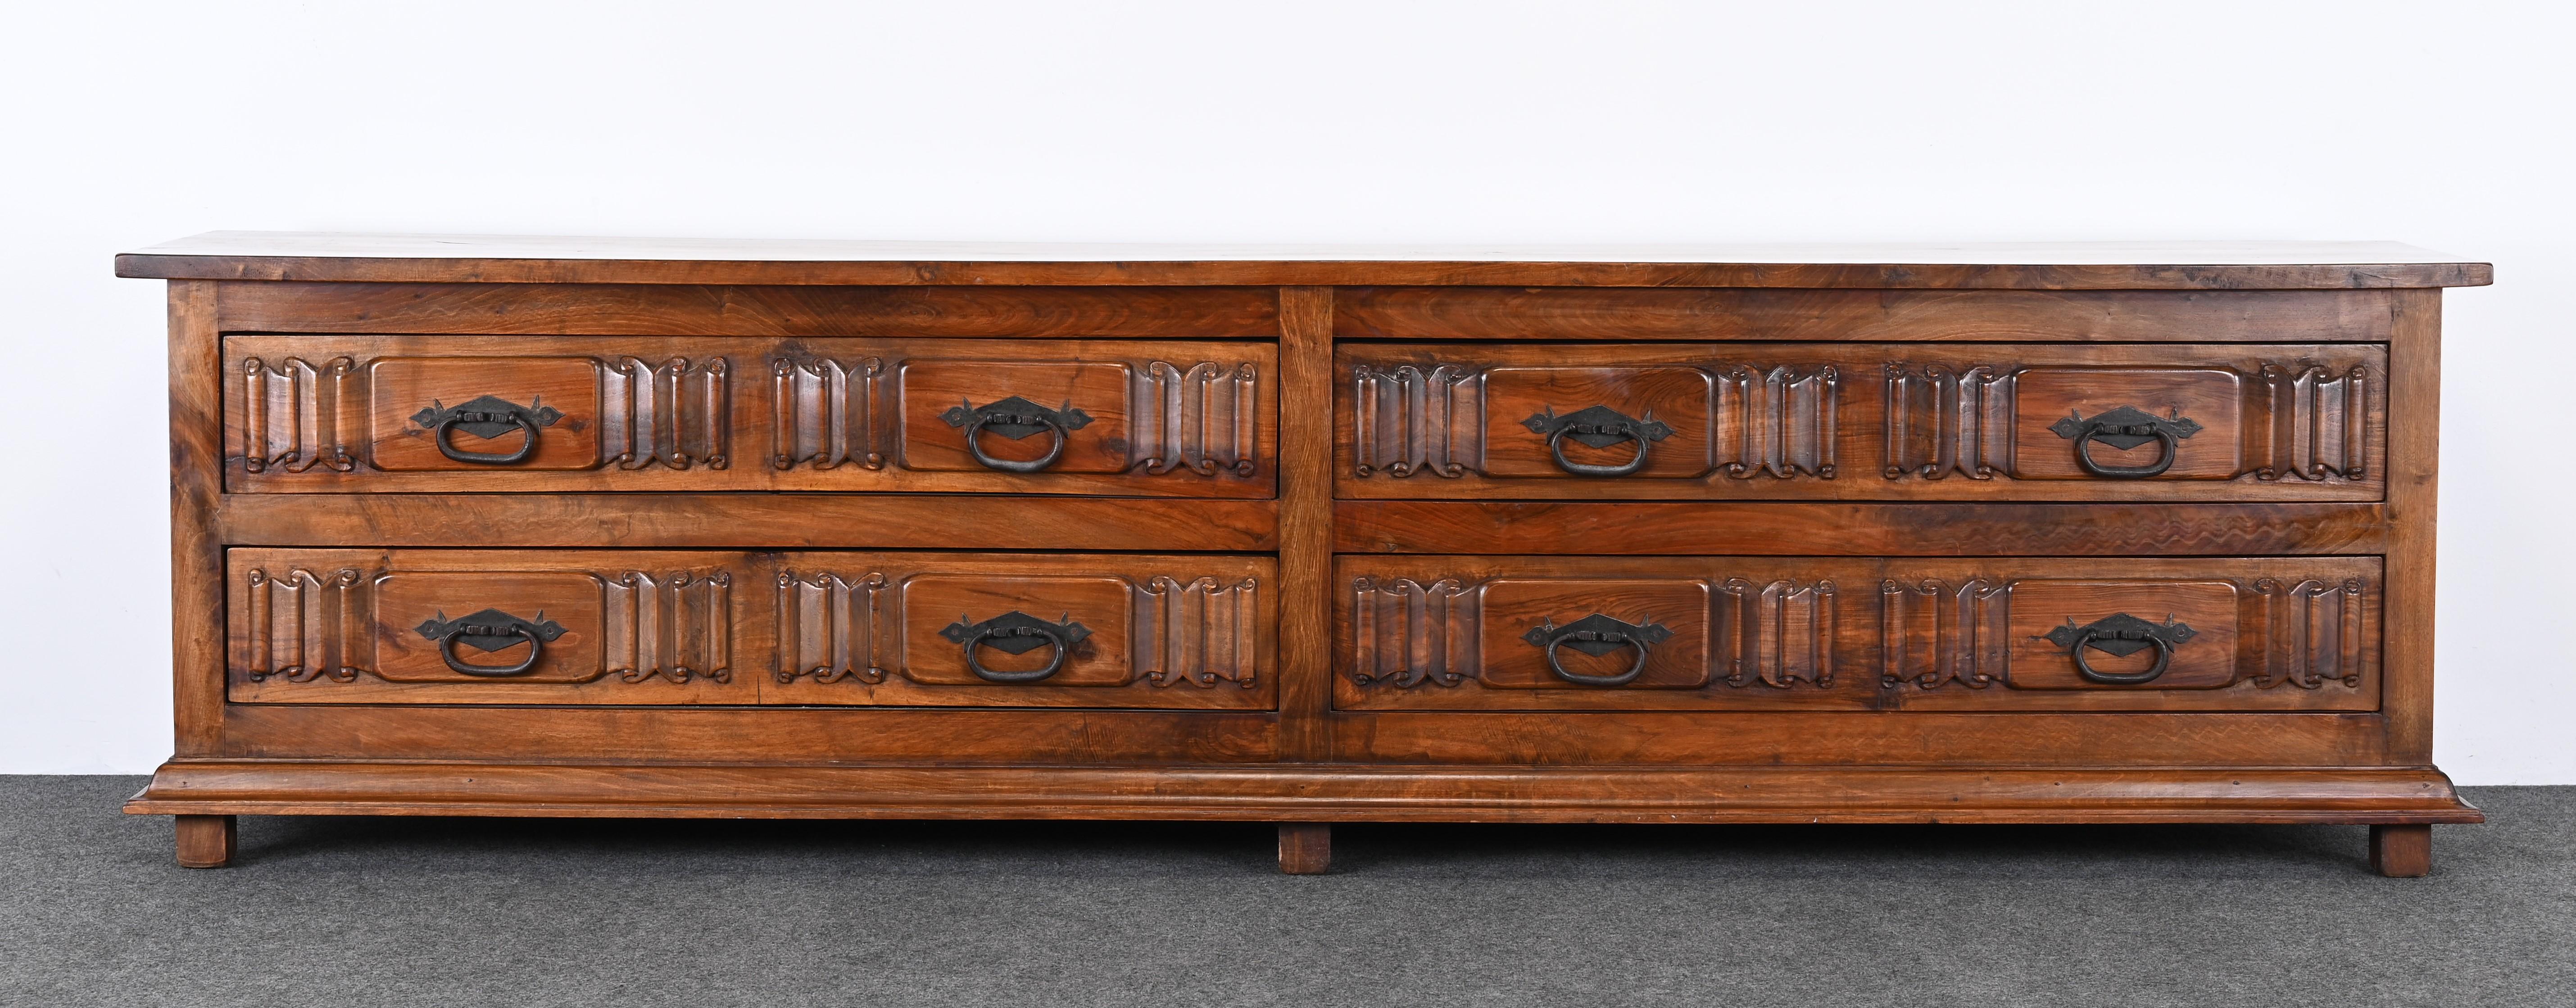 A magnificent Spanish Revival or Colonial Revival Three Piece Dresser. This amazing cabinet is made of solid black walnut accented with wrought iron hardware. The cabinet has twelve drawers for ample storage. The chest of drawers comes with two